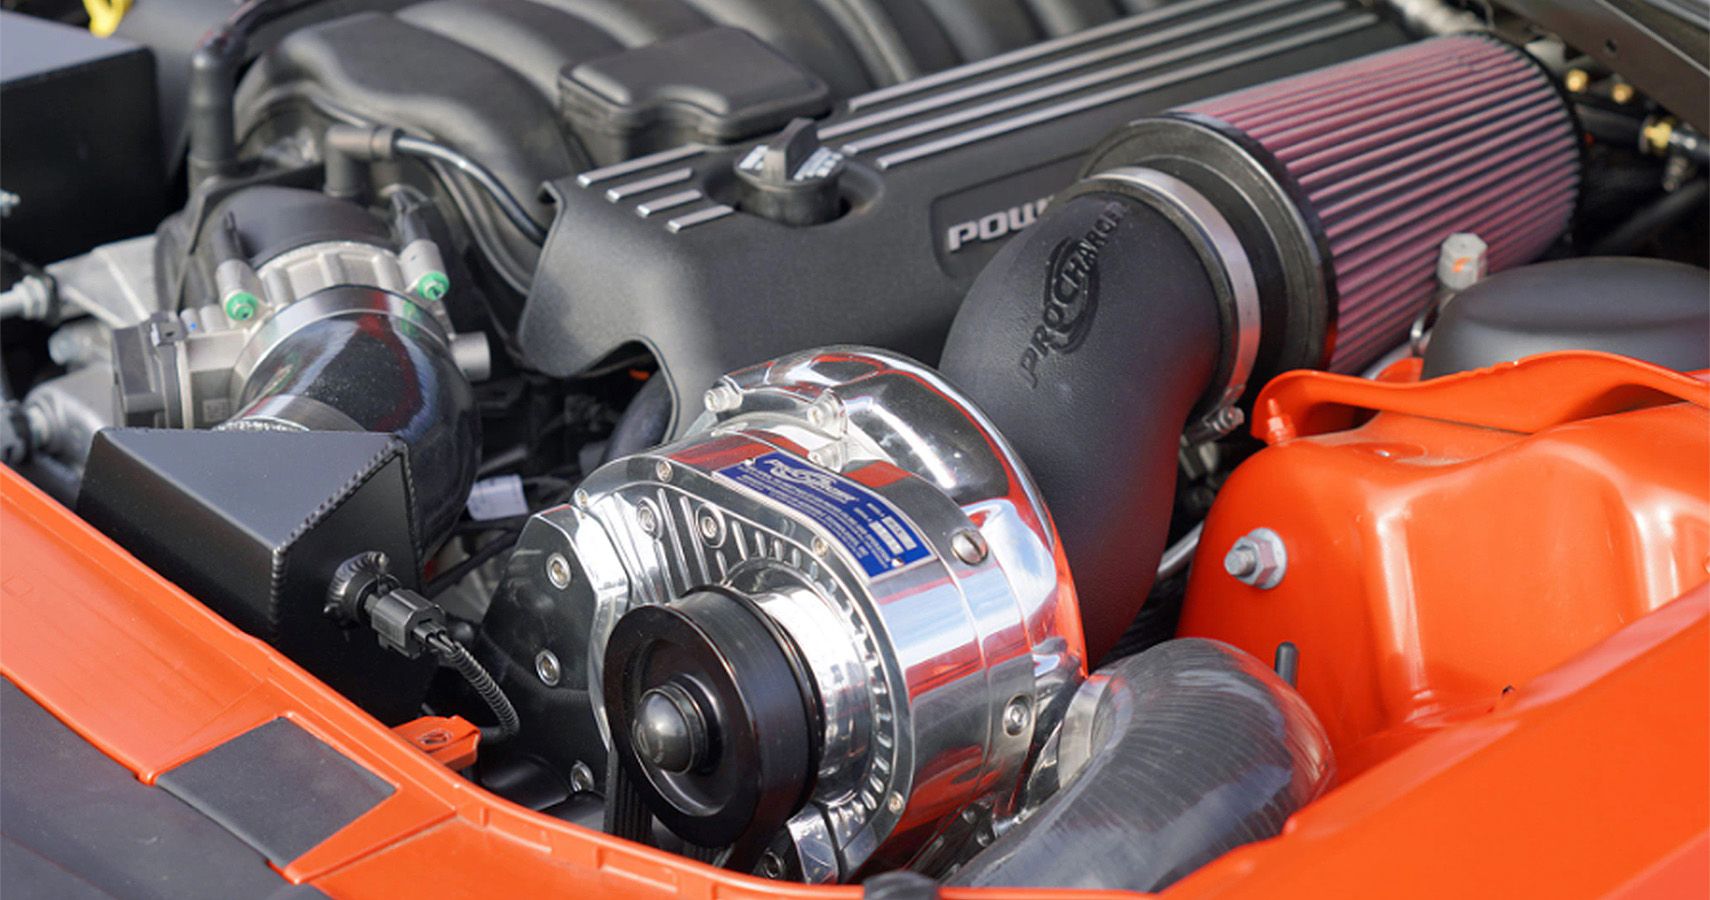 Procharger Is The Brand Name Of A Centrifugal Supercharger That Work Differently Than A Basic Supercharger And Deliver A Consistent Stream Of Air To Your Vehicle